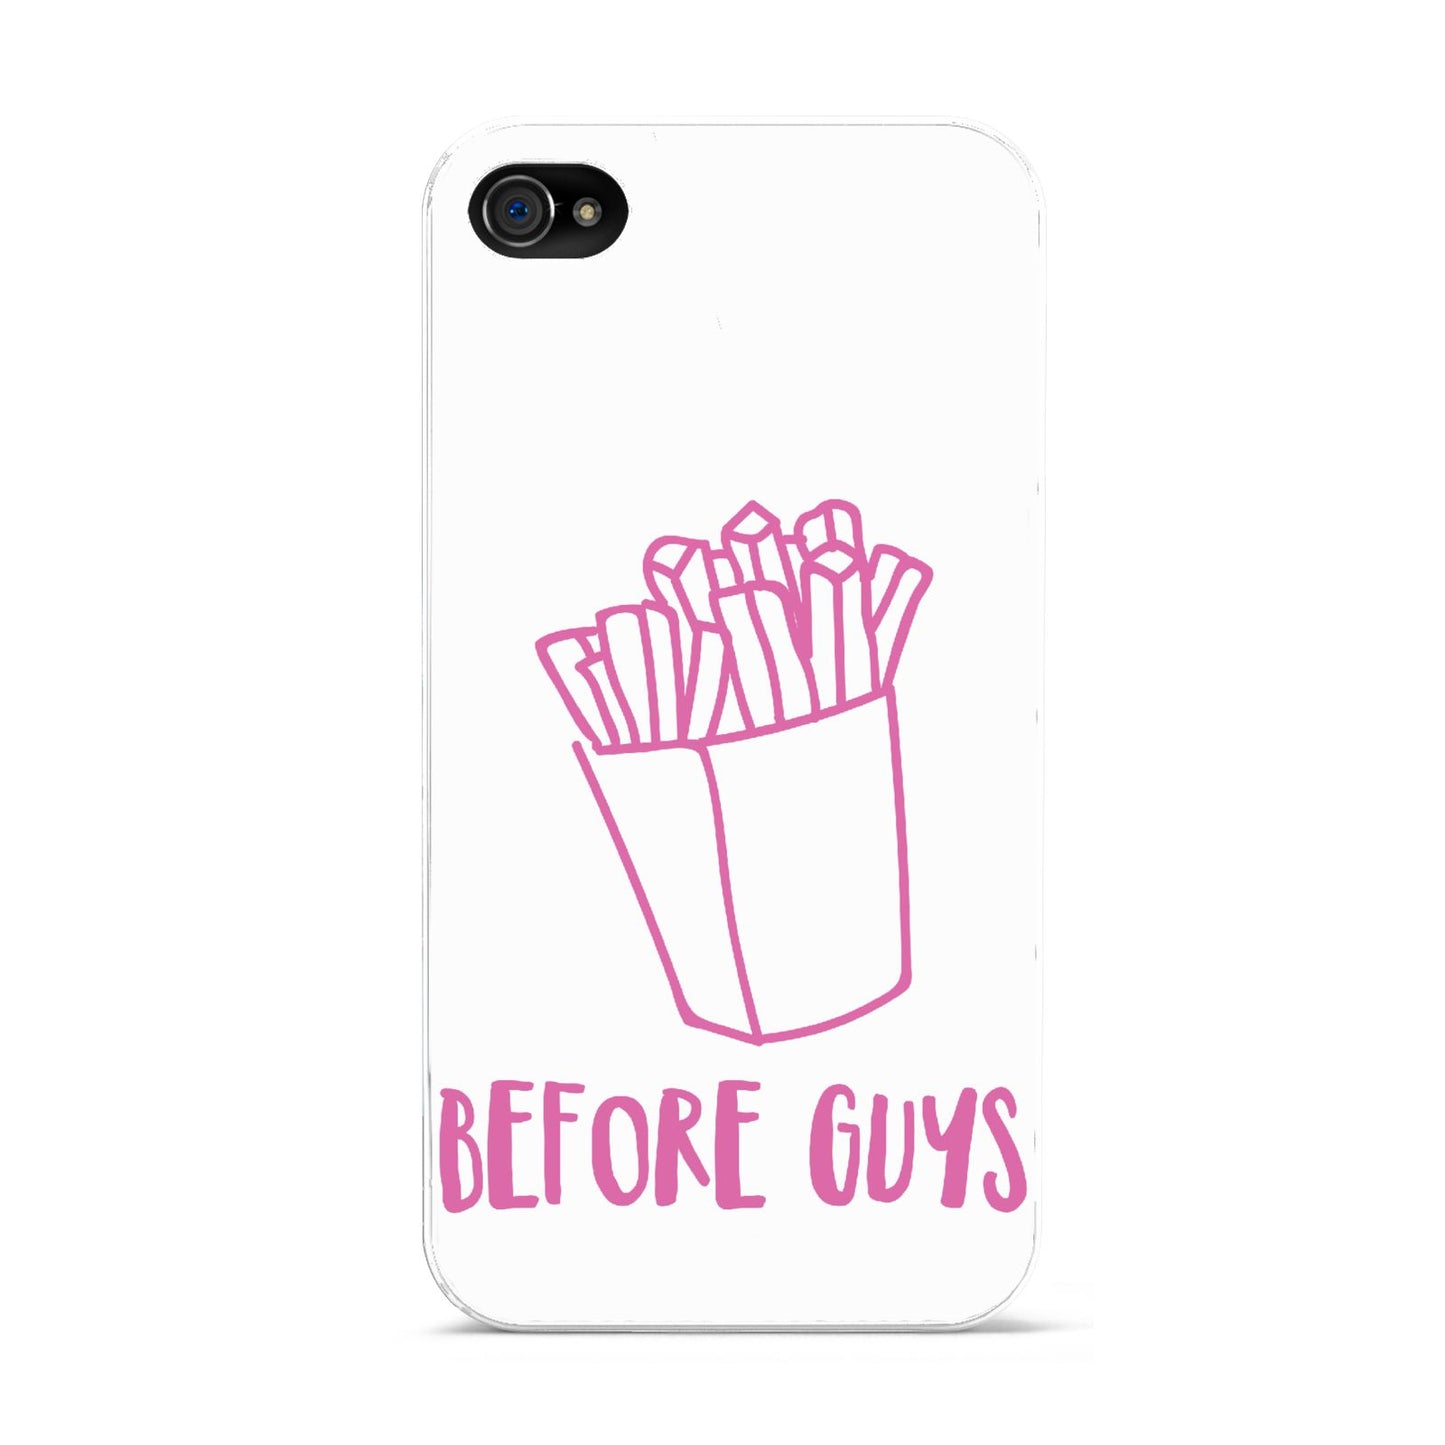 Valentines Fries Before Guys Apple iPhone 4s Case